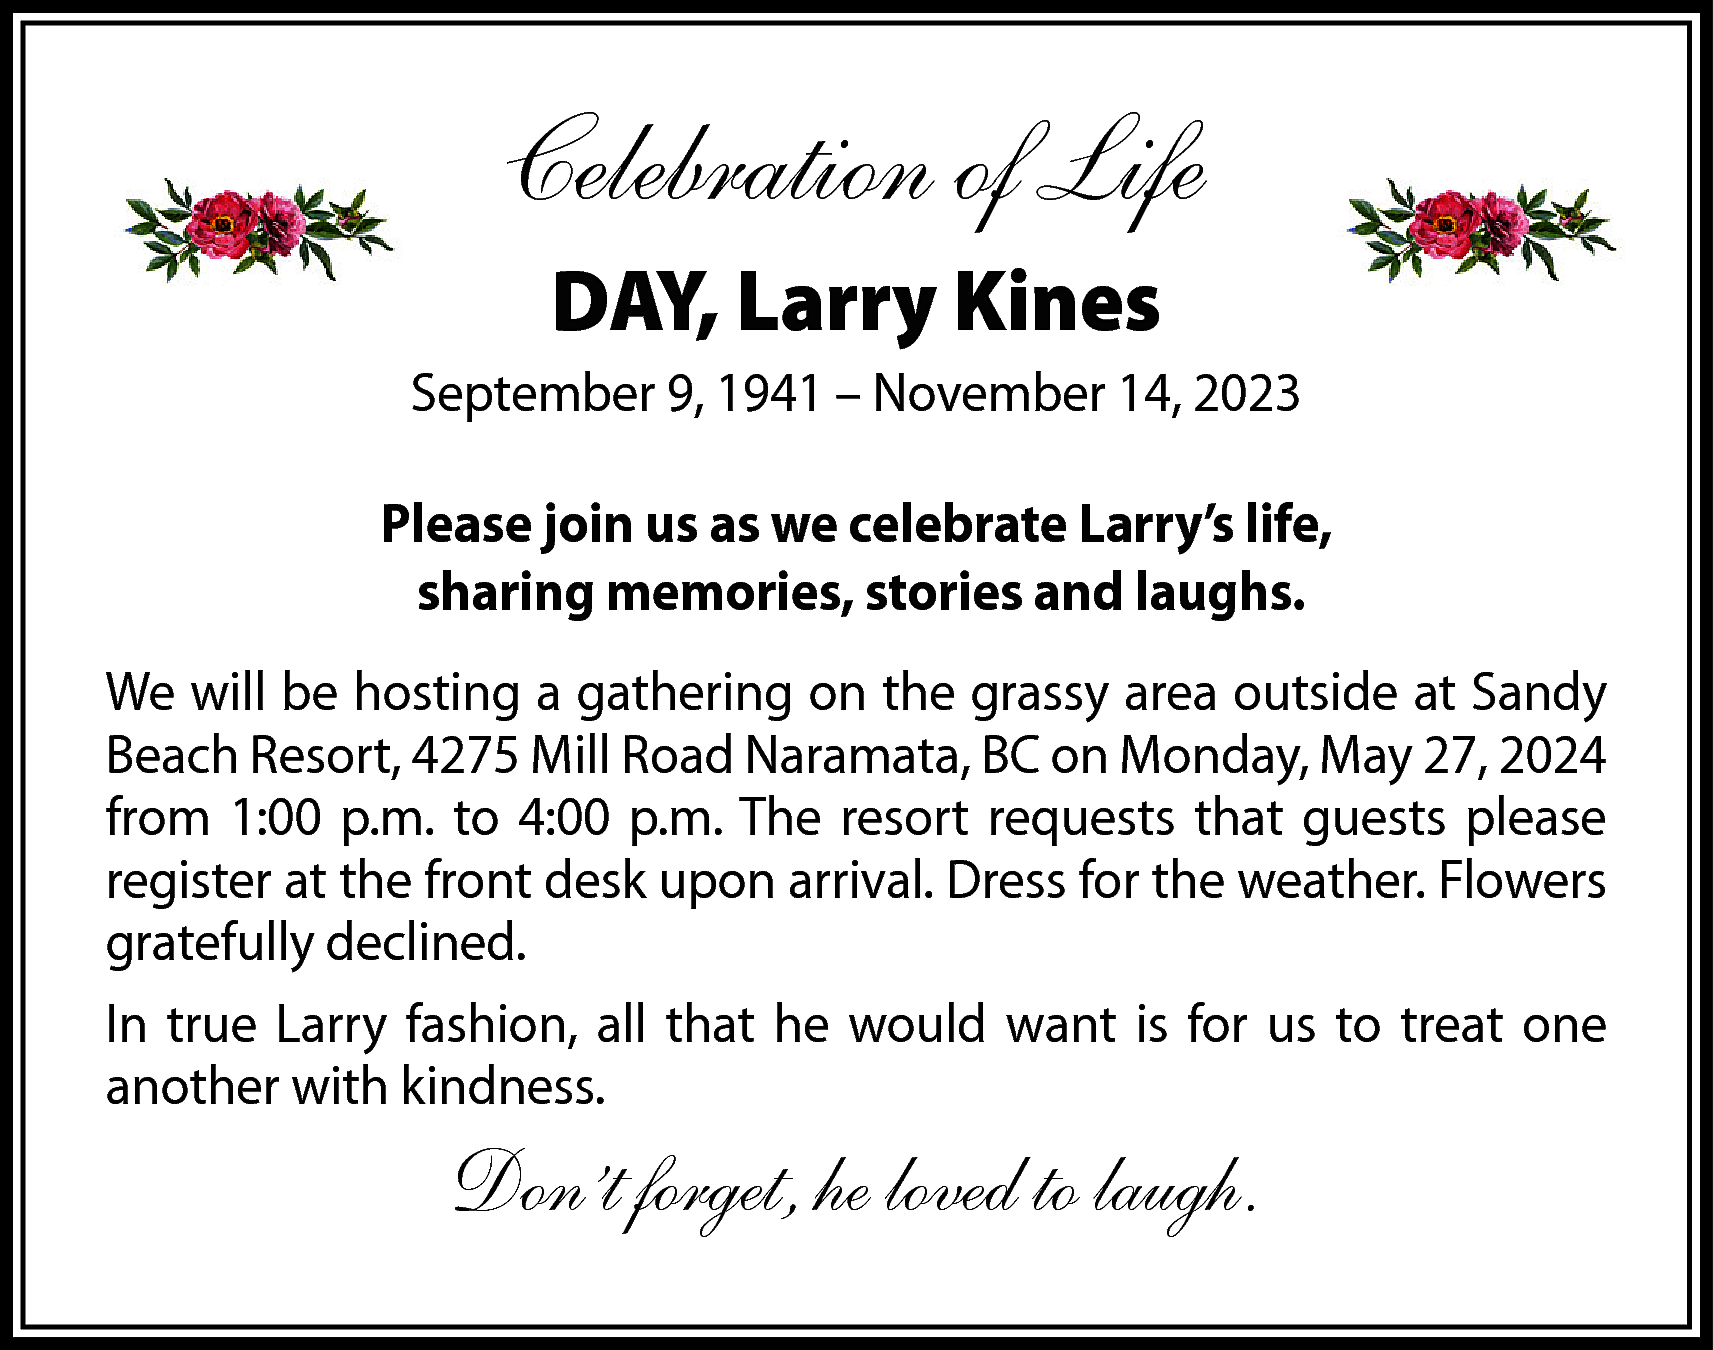 Celebration of Life <br>DAY, Larry  Celebration of Life  DAY, Larry Kines  September 9, 1941 – November 14, 2023  Please join us as we celebrate Larry’s life,  sharing memories, stories and laughs.  We will be hosting a gathering on the grassy area outside at Sandy  Beach Resort, 4275 Mill Road Naramata, BC on Monday, May 27, 2024  from 1:00 p.m. to 4:00 p.m. The resort requests that guests please  register at the front desk upon arrival. Dress for the weather. Flowers  gratefully declined.  In true Larry fashion, all that he would want is for us to treat one  another with kindness.    Don’t forget, he loved to laugh.    